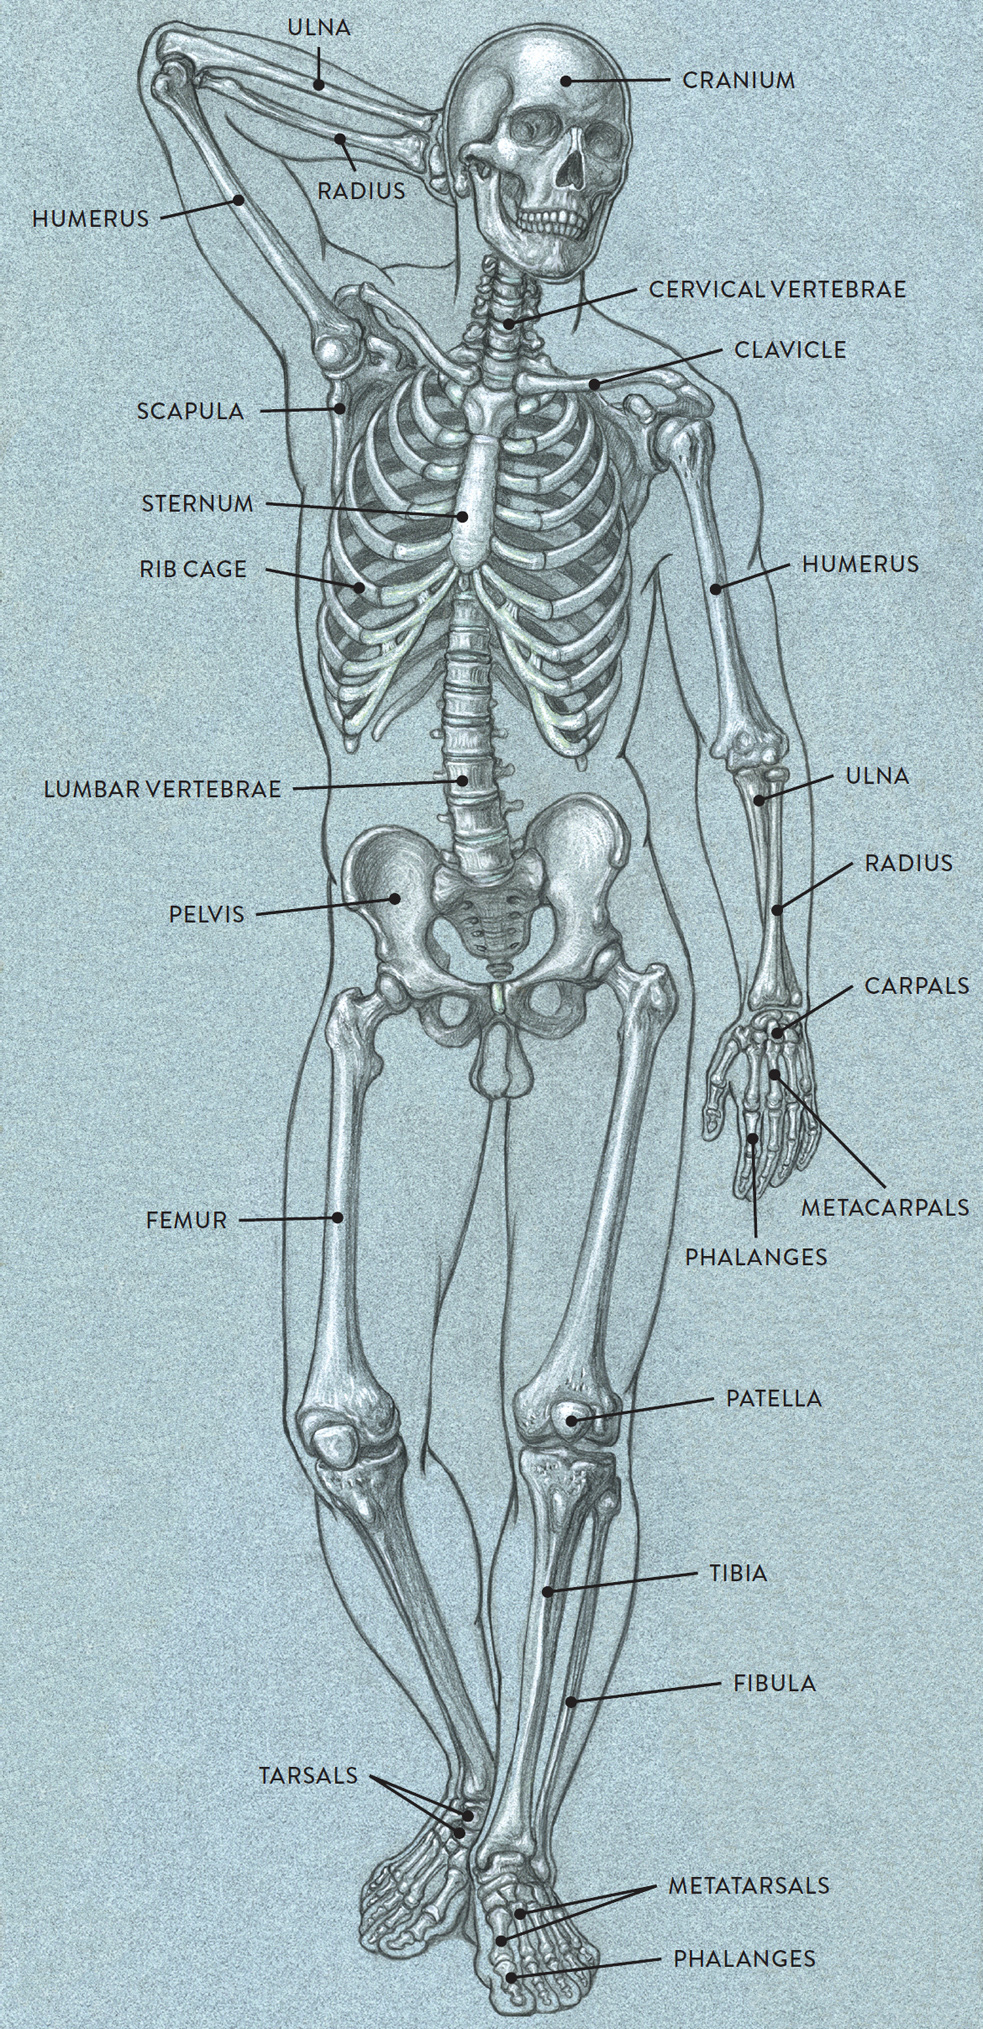 Bones and Surface Landmarks - Classic Human Anatomy in Motion: The